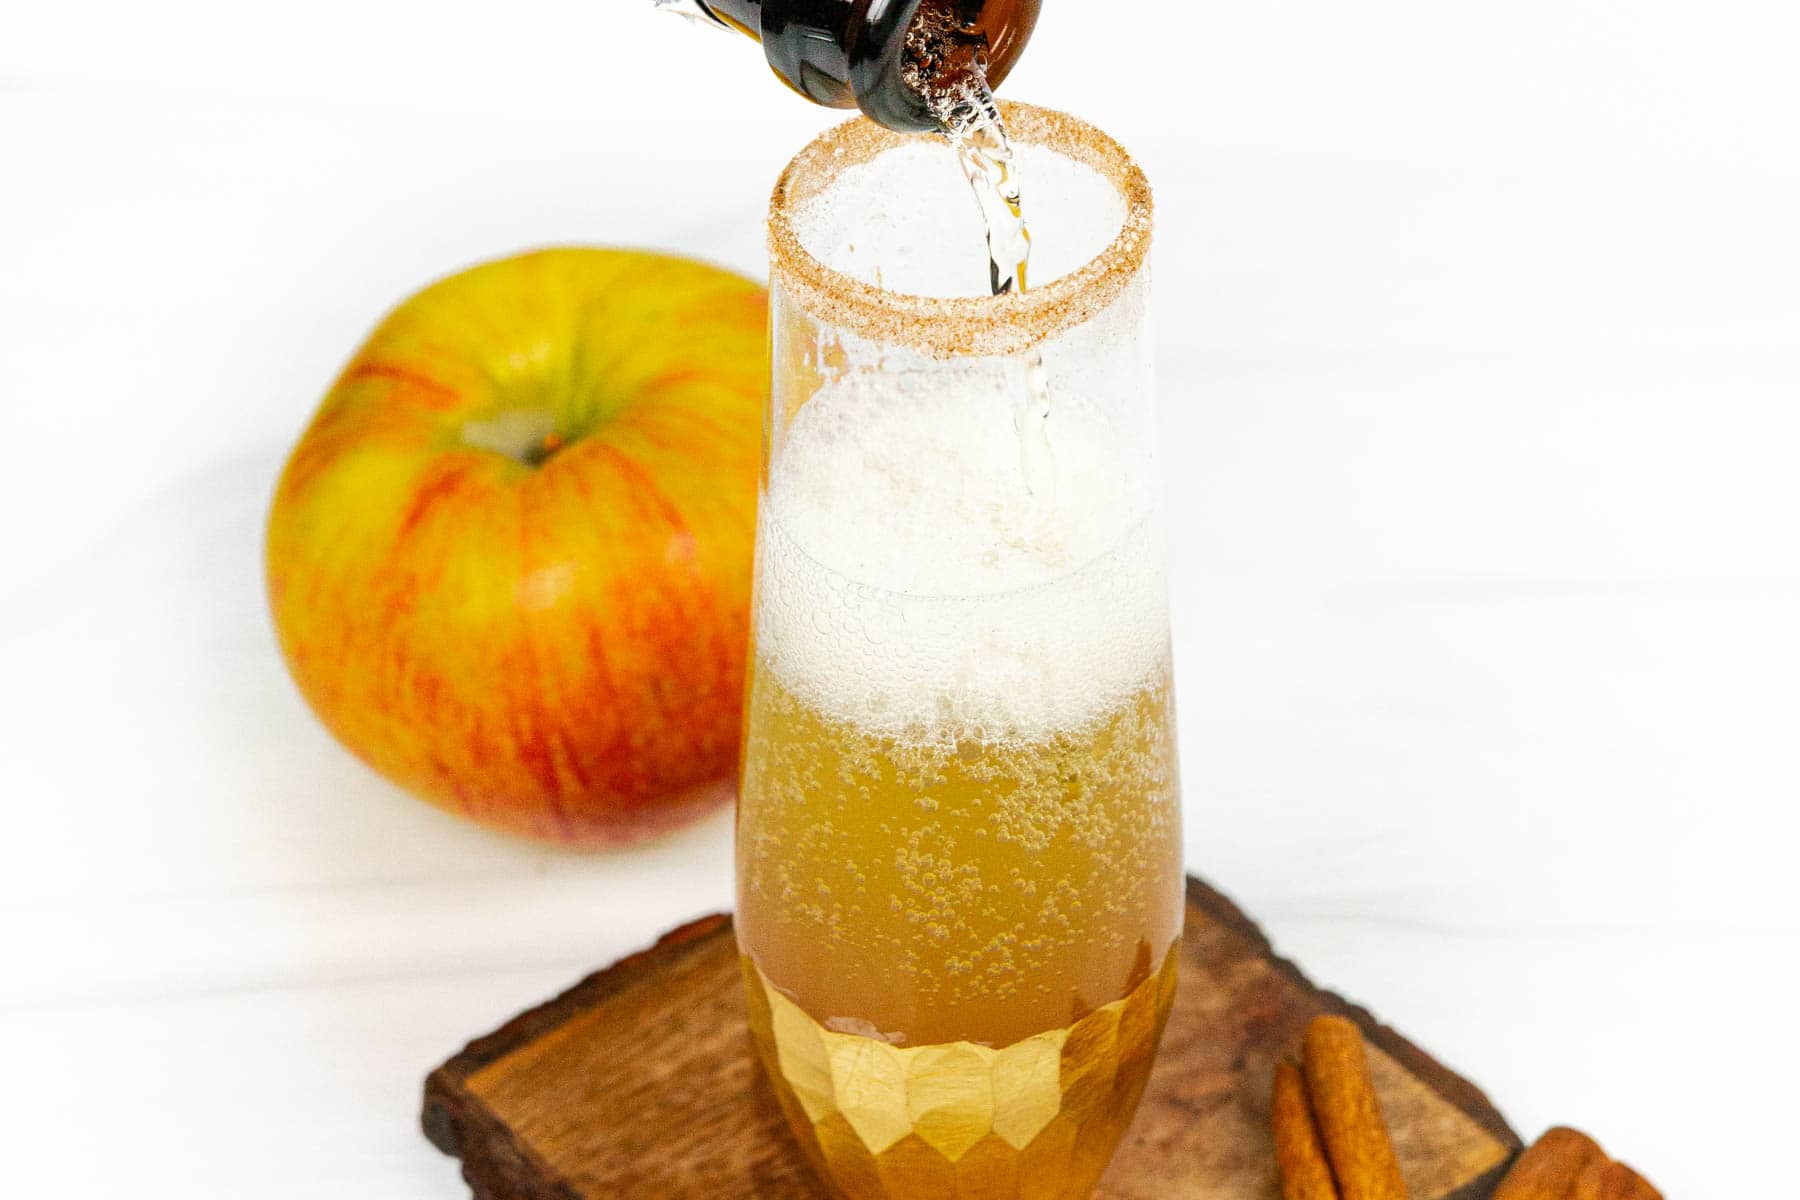 Champagne being poured into a glass of apple cider.